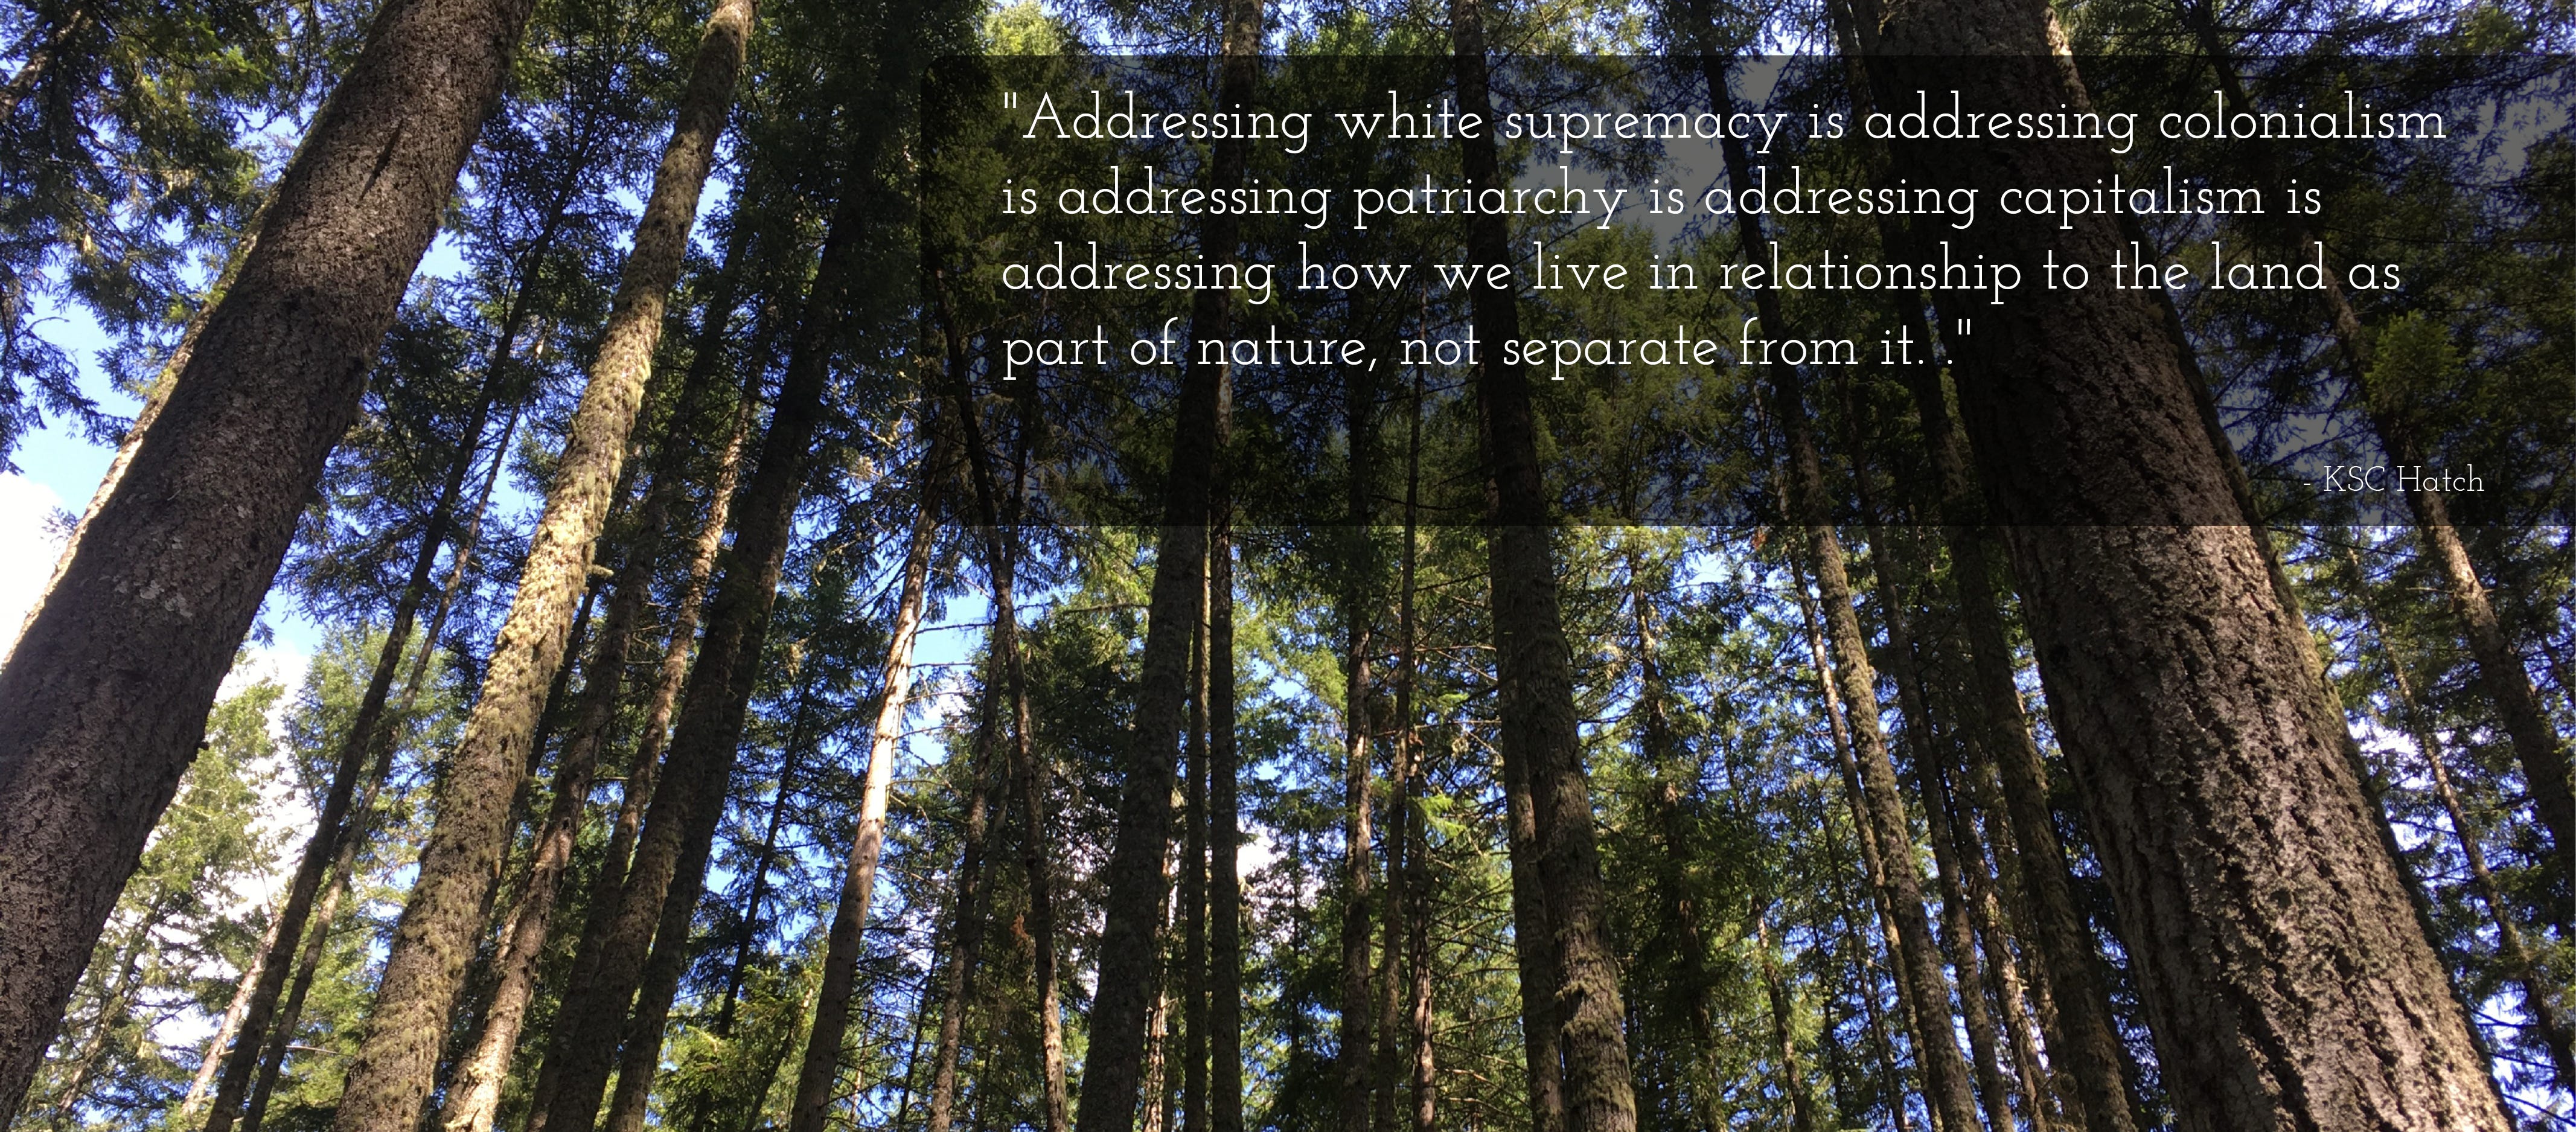 Photo of a forest of tall coniferous trees with little bits of blue sky peeking through. A quote from the accompanying blog post is in white text in the upper right corner of the image. The quote reads: "Addressing white supremact is addressing colonialism is addressing patriarchy is addressing capitalism is addressing how we live in relationship to the land as part of nature, not separate from it."